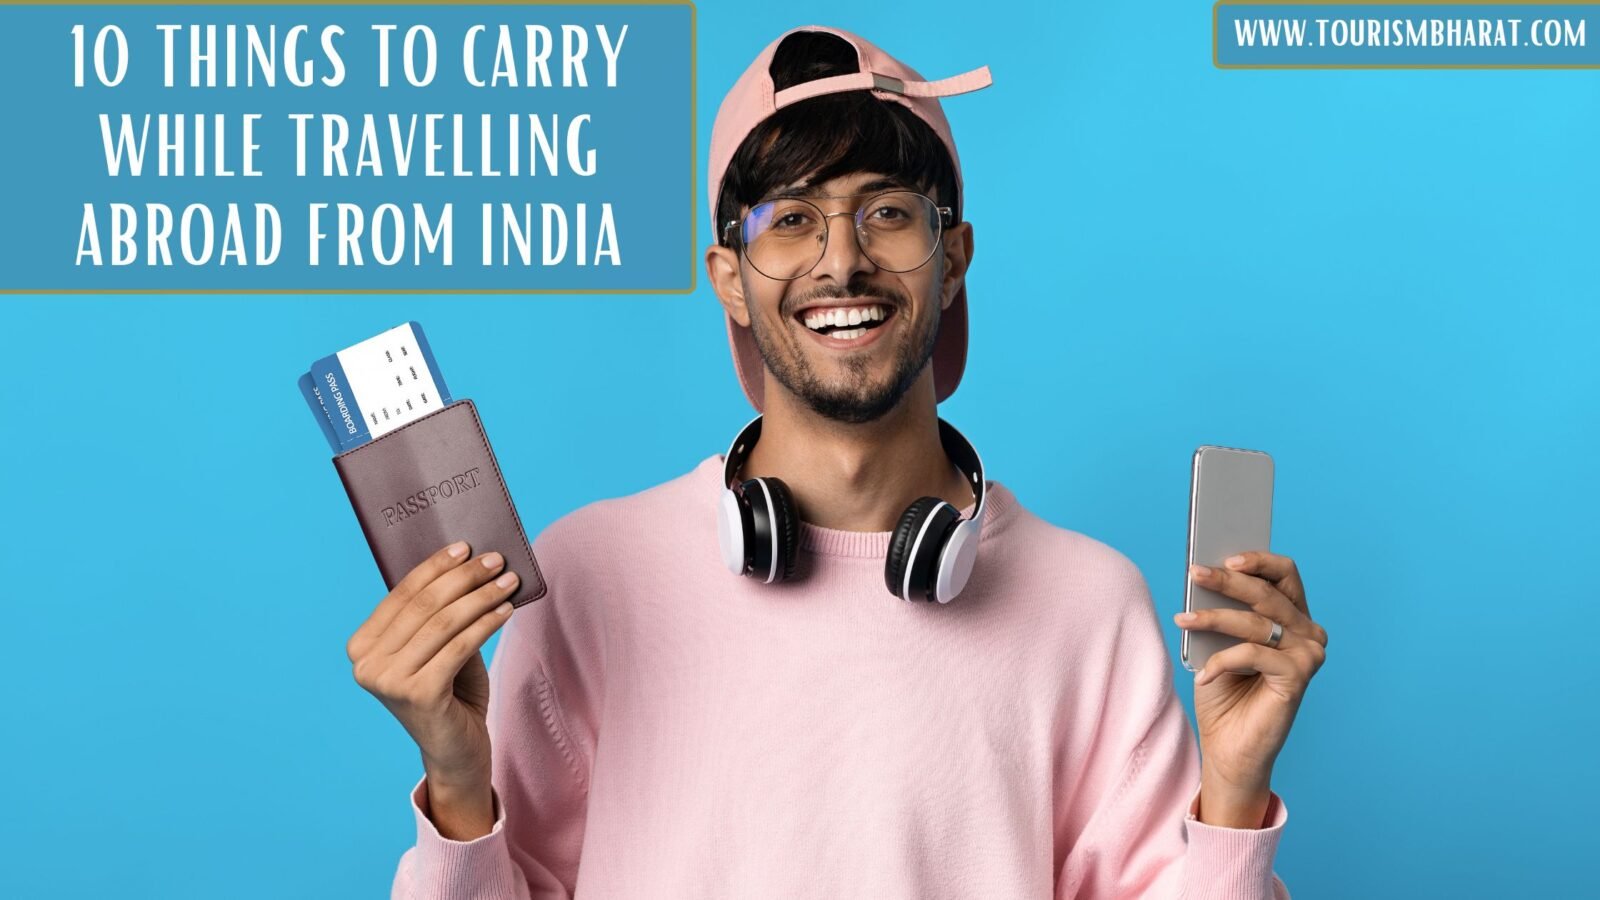 Things To Carry While Travelling Abroad From India - International Travel Backpacking Essentials